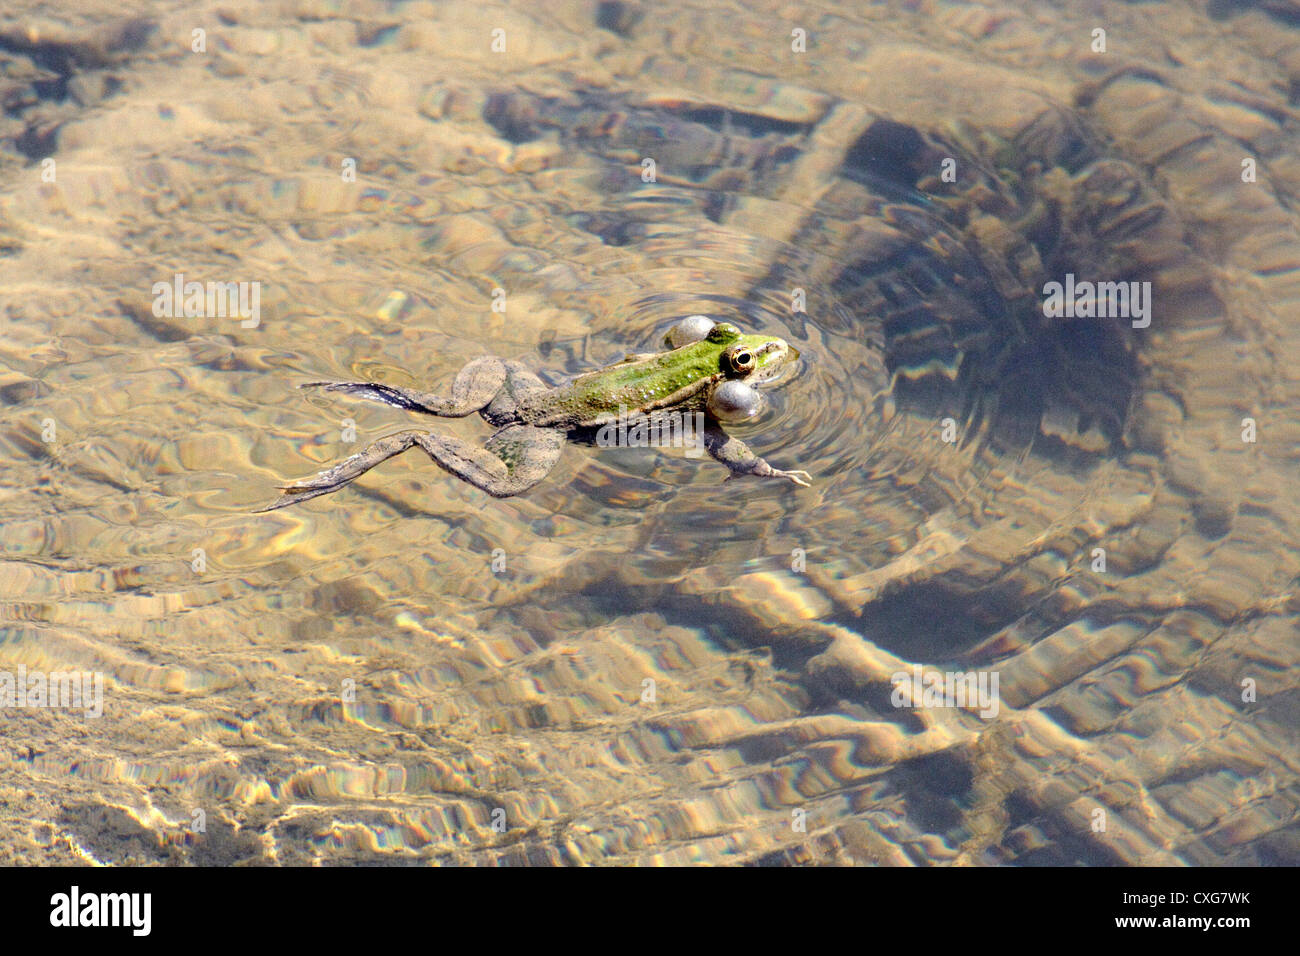 Alanya, a frog in a pond Stock Photo